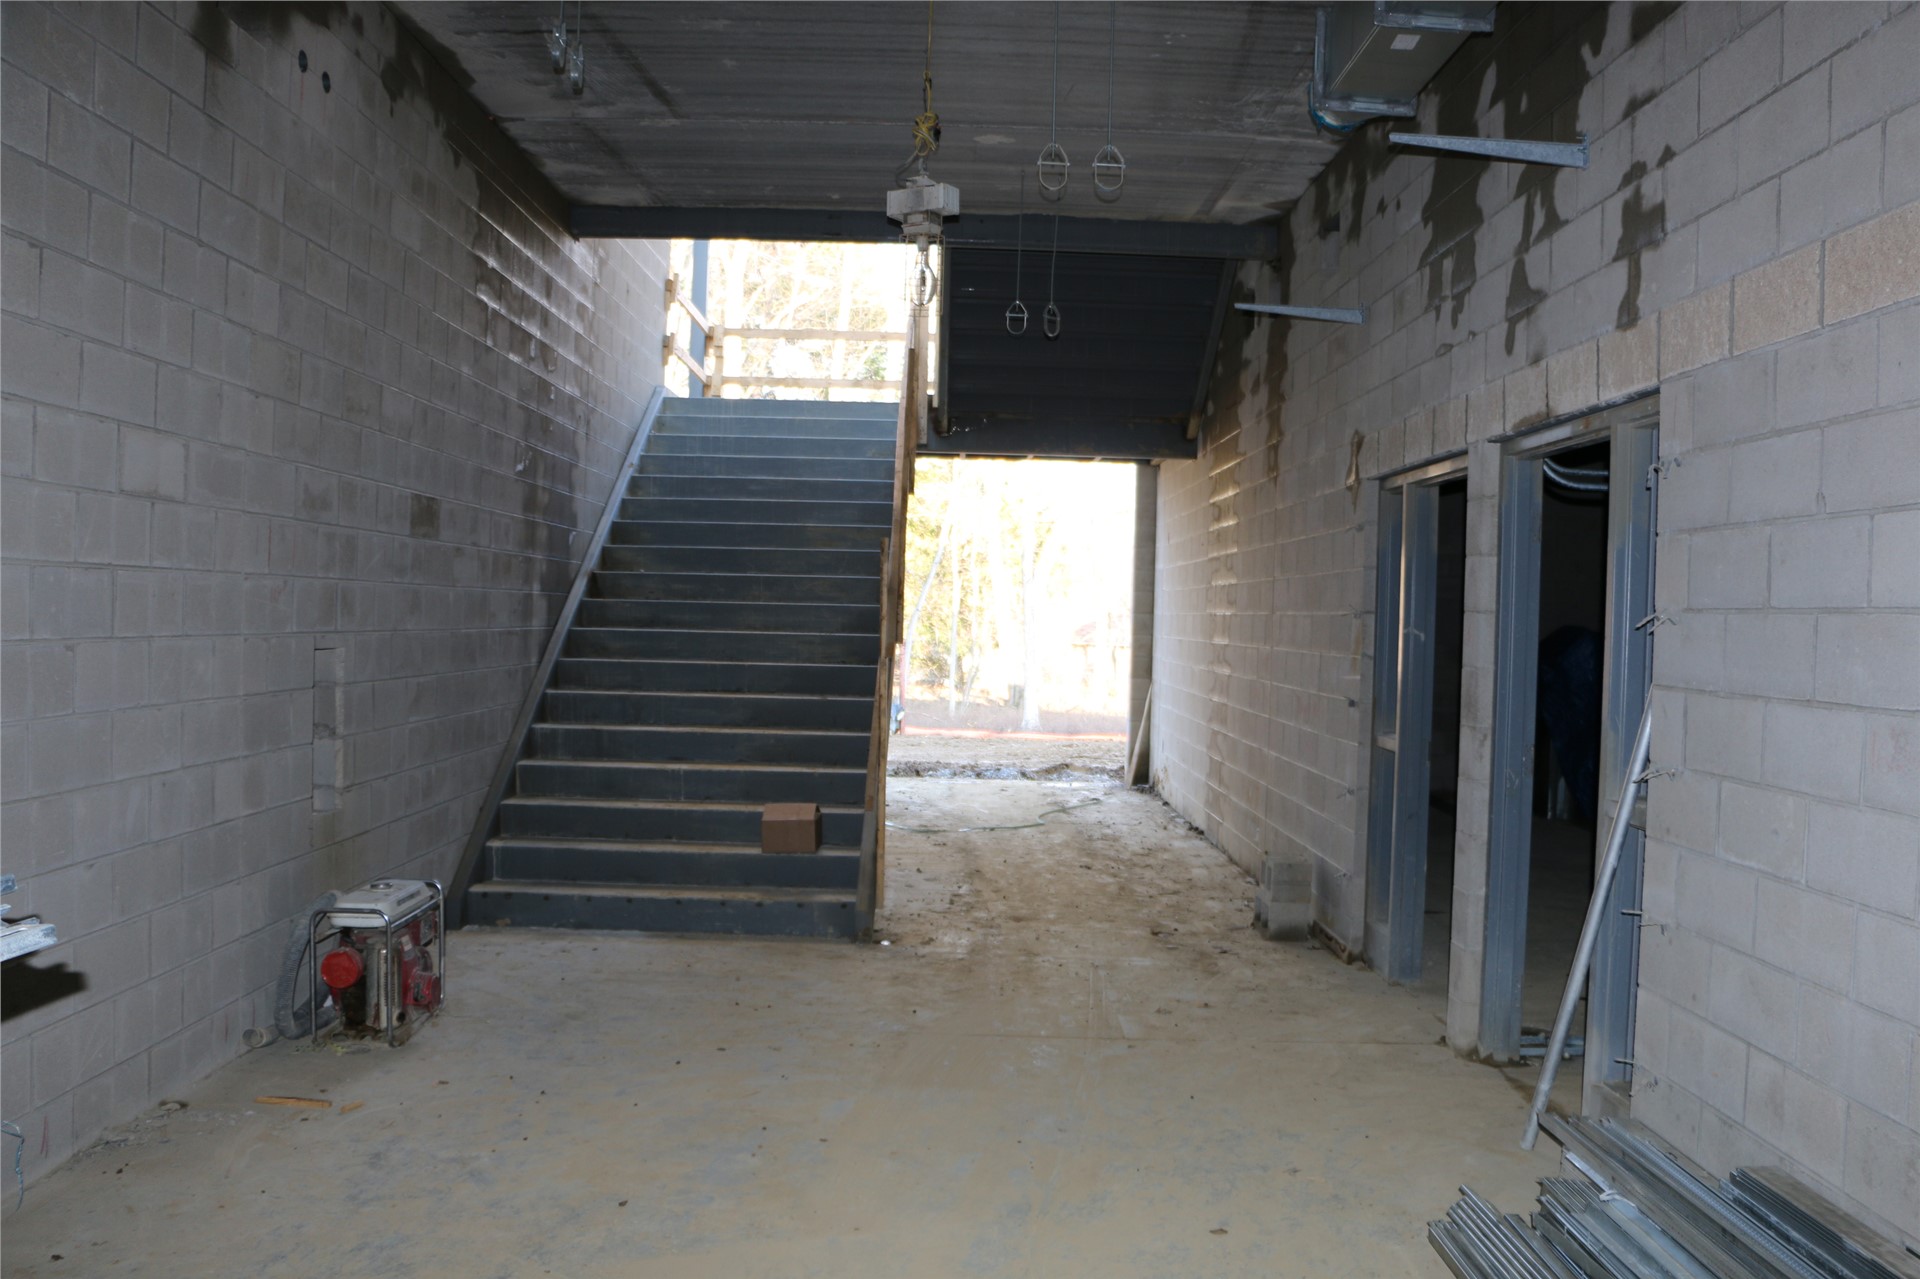 Stair case leading to second floor at the end of the east side of the academic wing